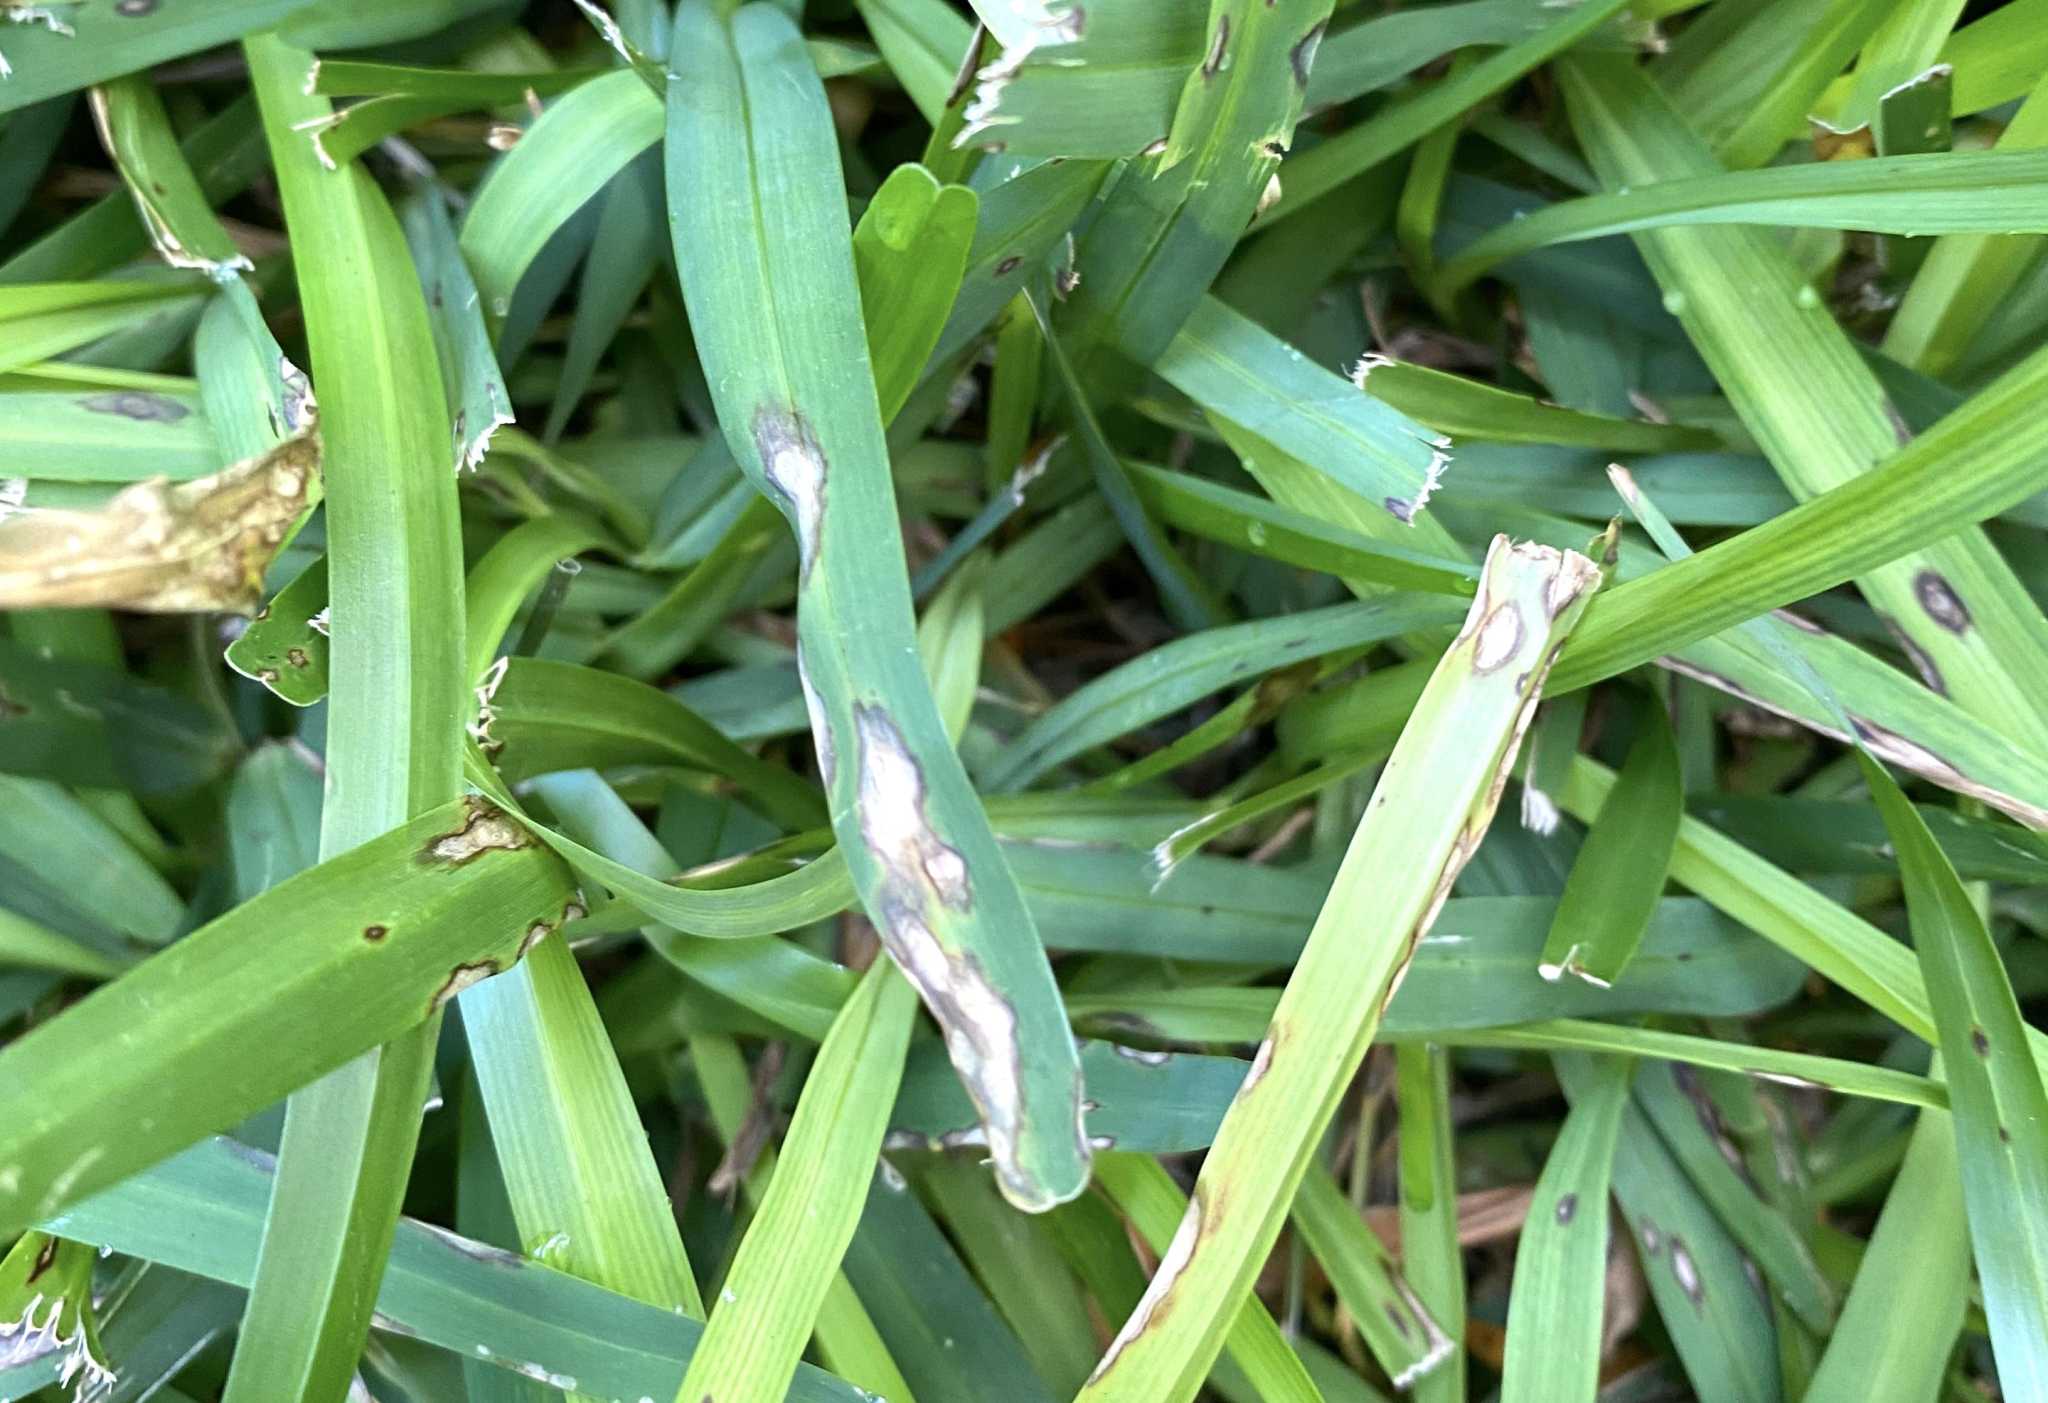 How to treat gray fungus leaf spot on your lawn